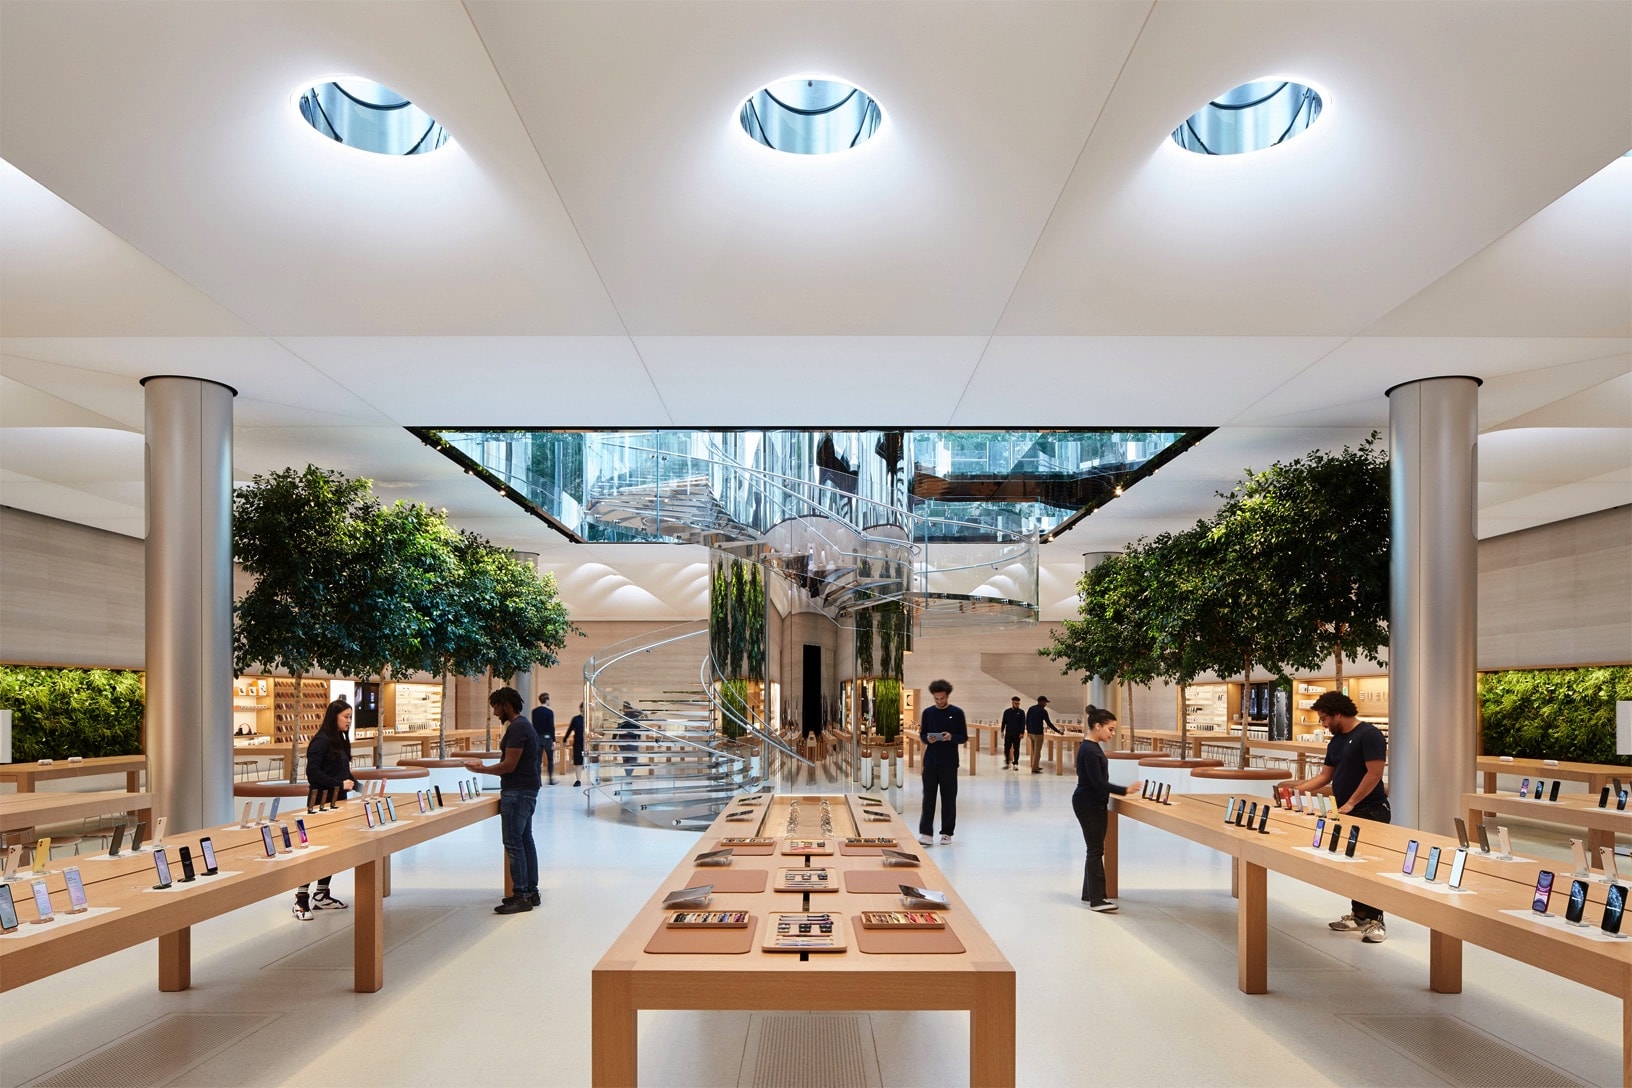 Apple will show off Apple TV+ at its Fifth Avenue Apple Store.